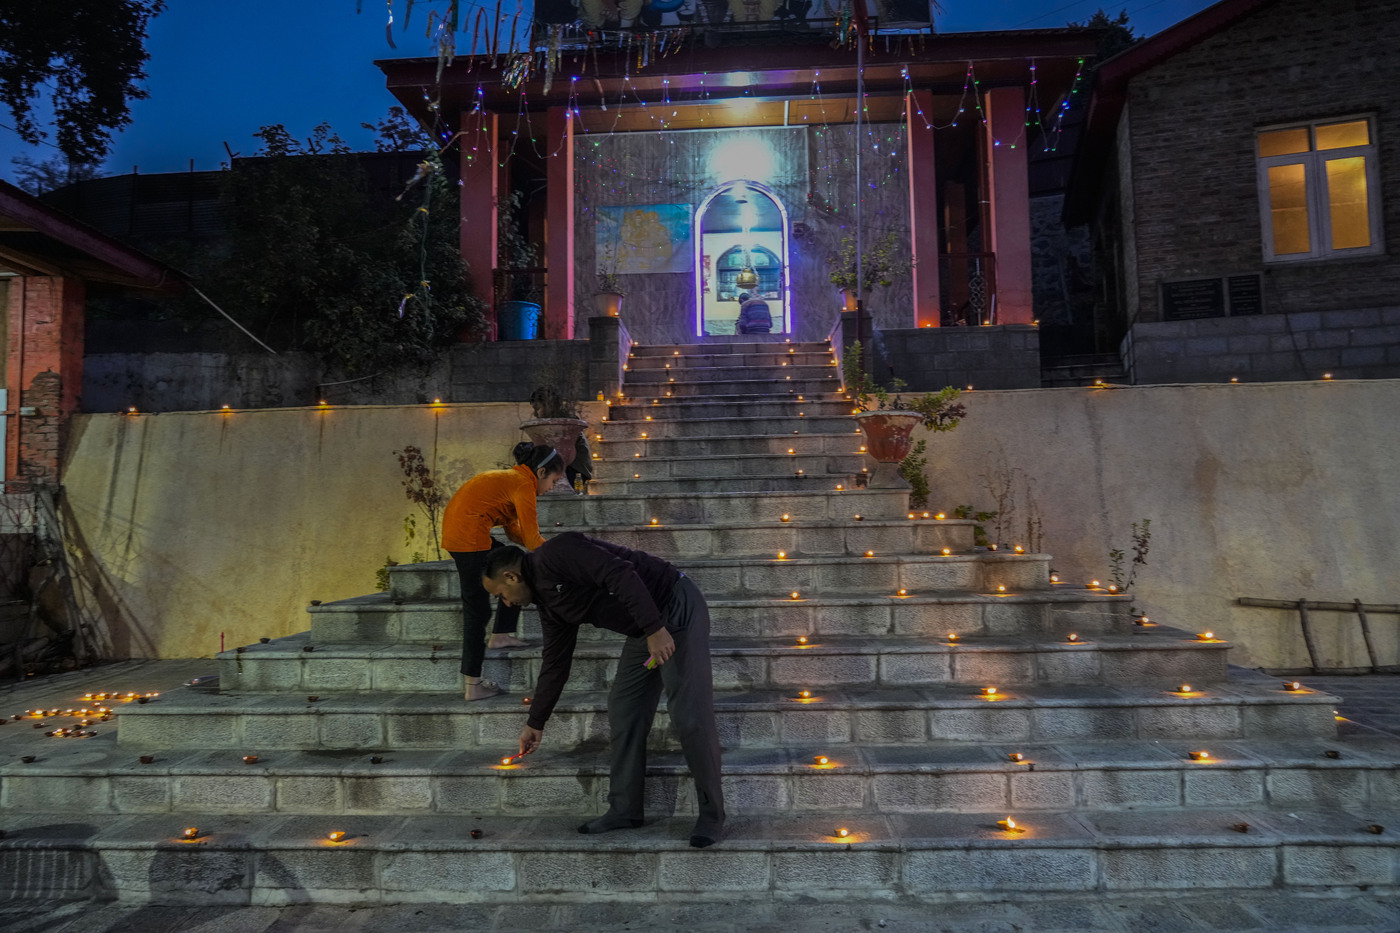 Hindus light candle outside the stairs of a temple as they celebrate Diwali, the Hindu festival of lights in Srinagar, Indian controlled Kashmir, Monday, Oct. 24, 2022.(AP Photo/Mukhtar Khan)